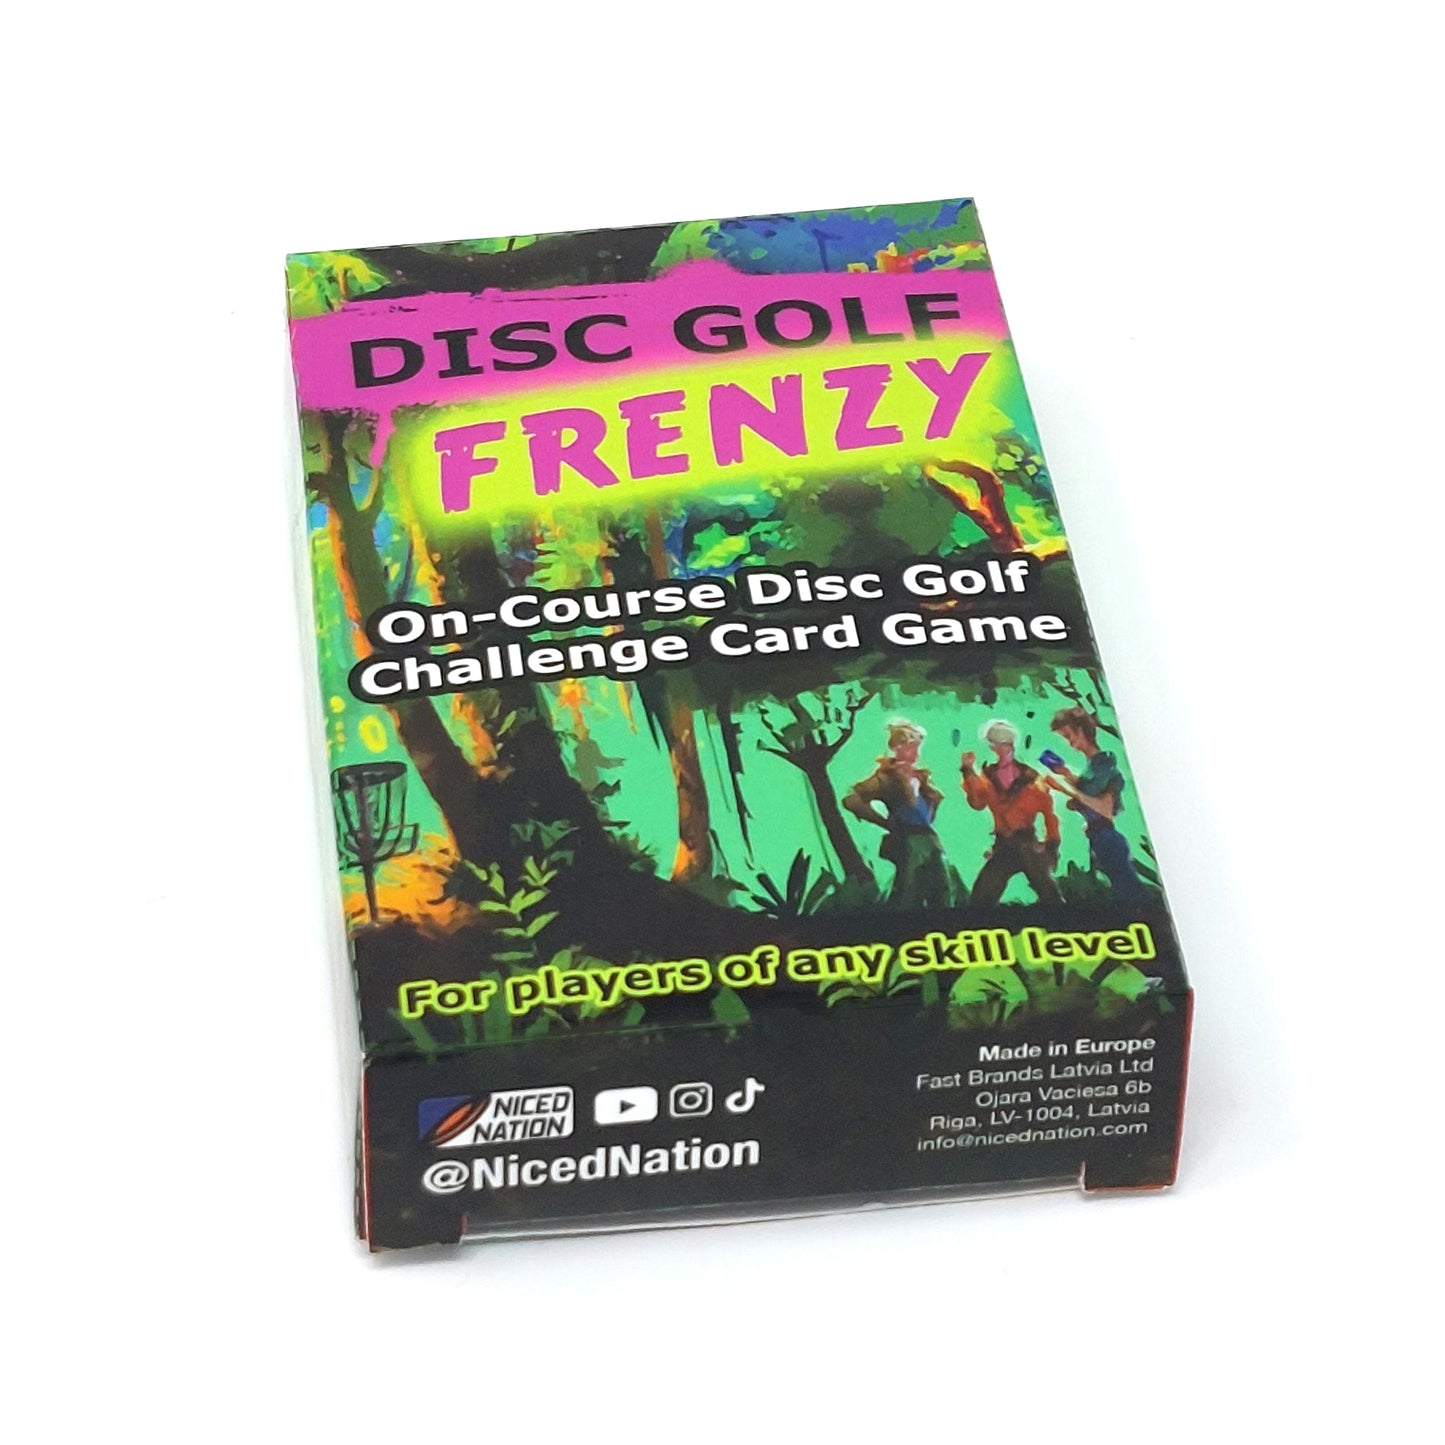 Disc Golf Frenzy card game by Niced Nation